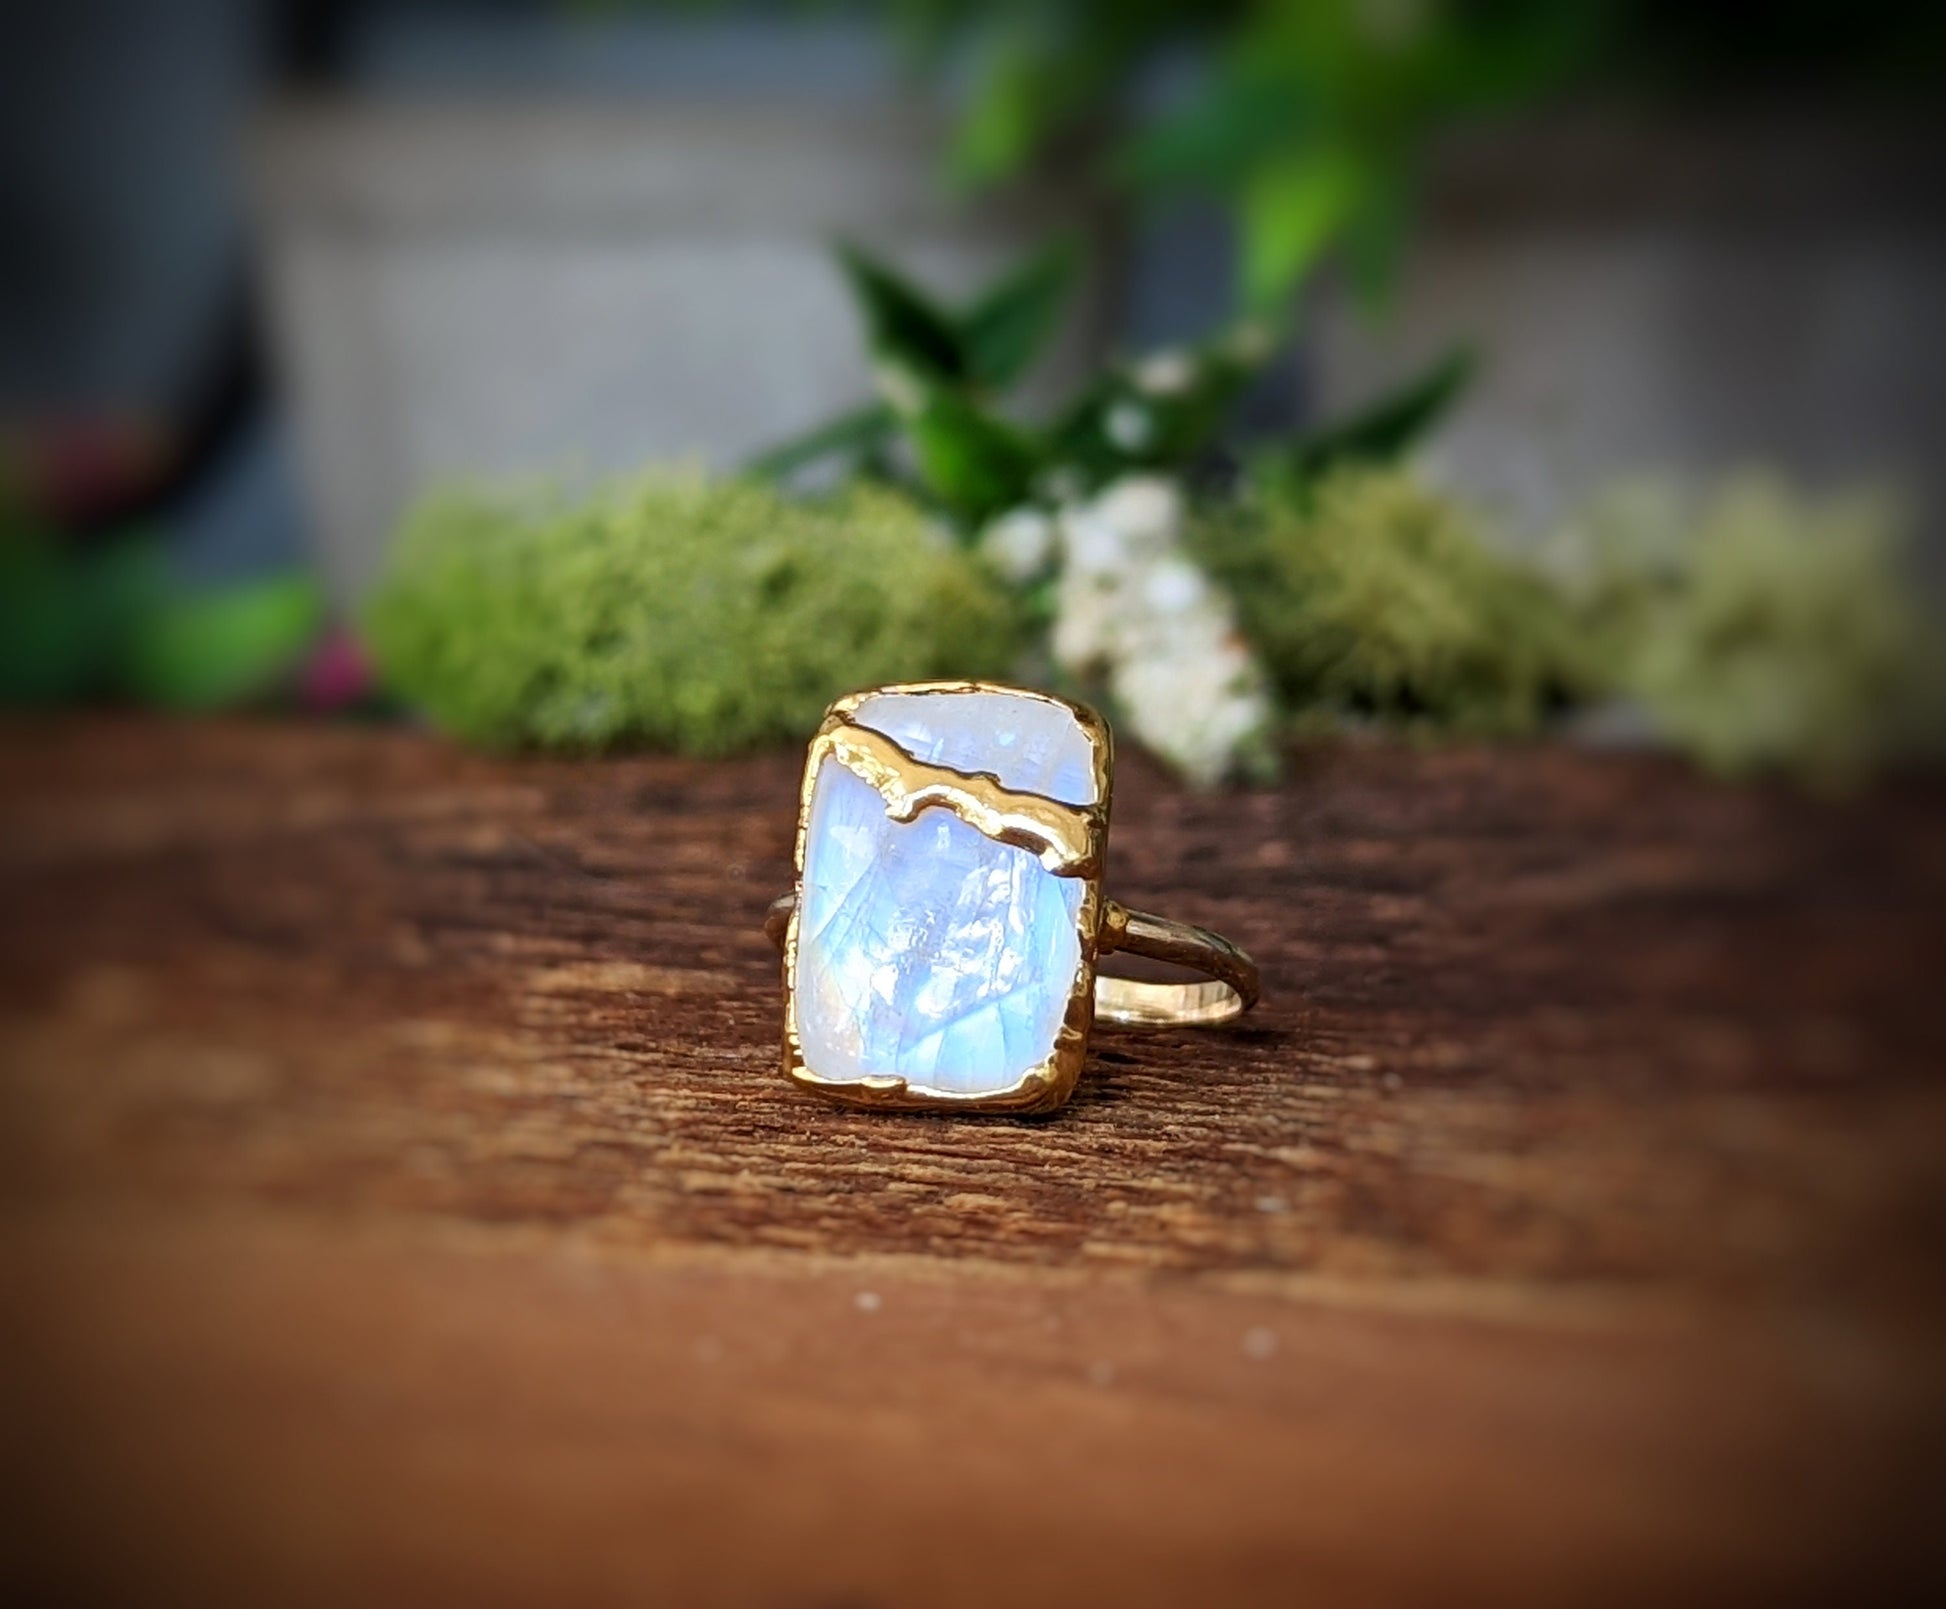 Natural Rainbow Moonstone ring in unique Kintsugi style 18k Gold setting